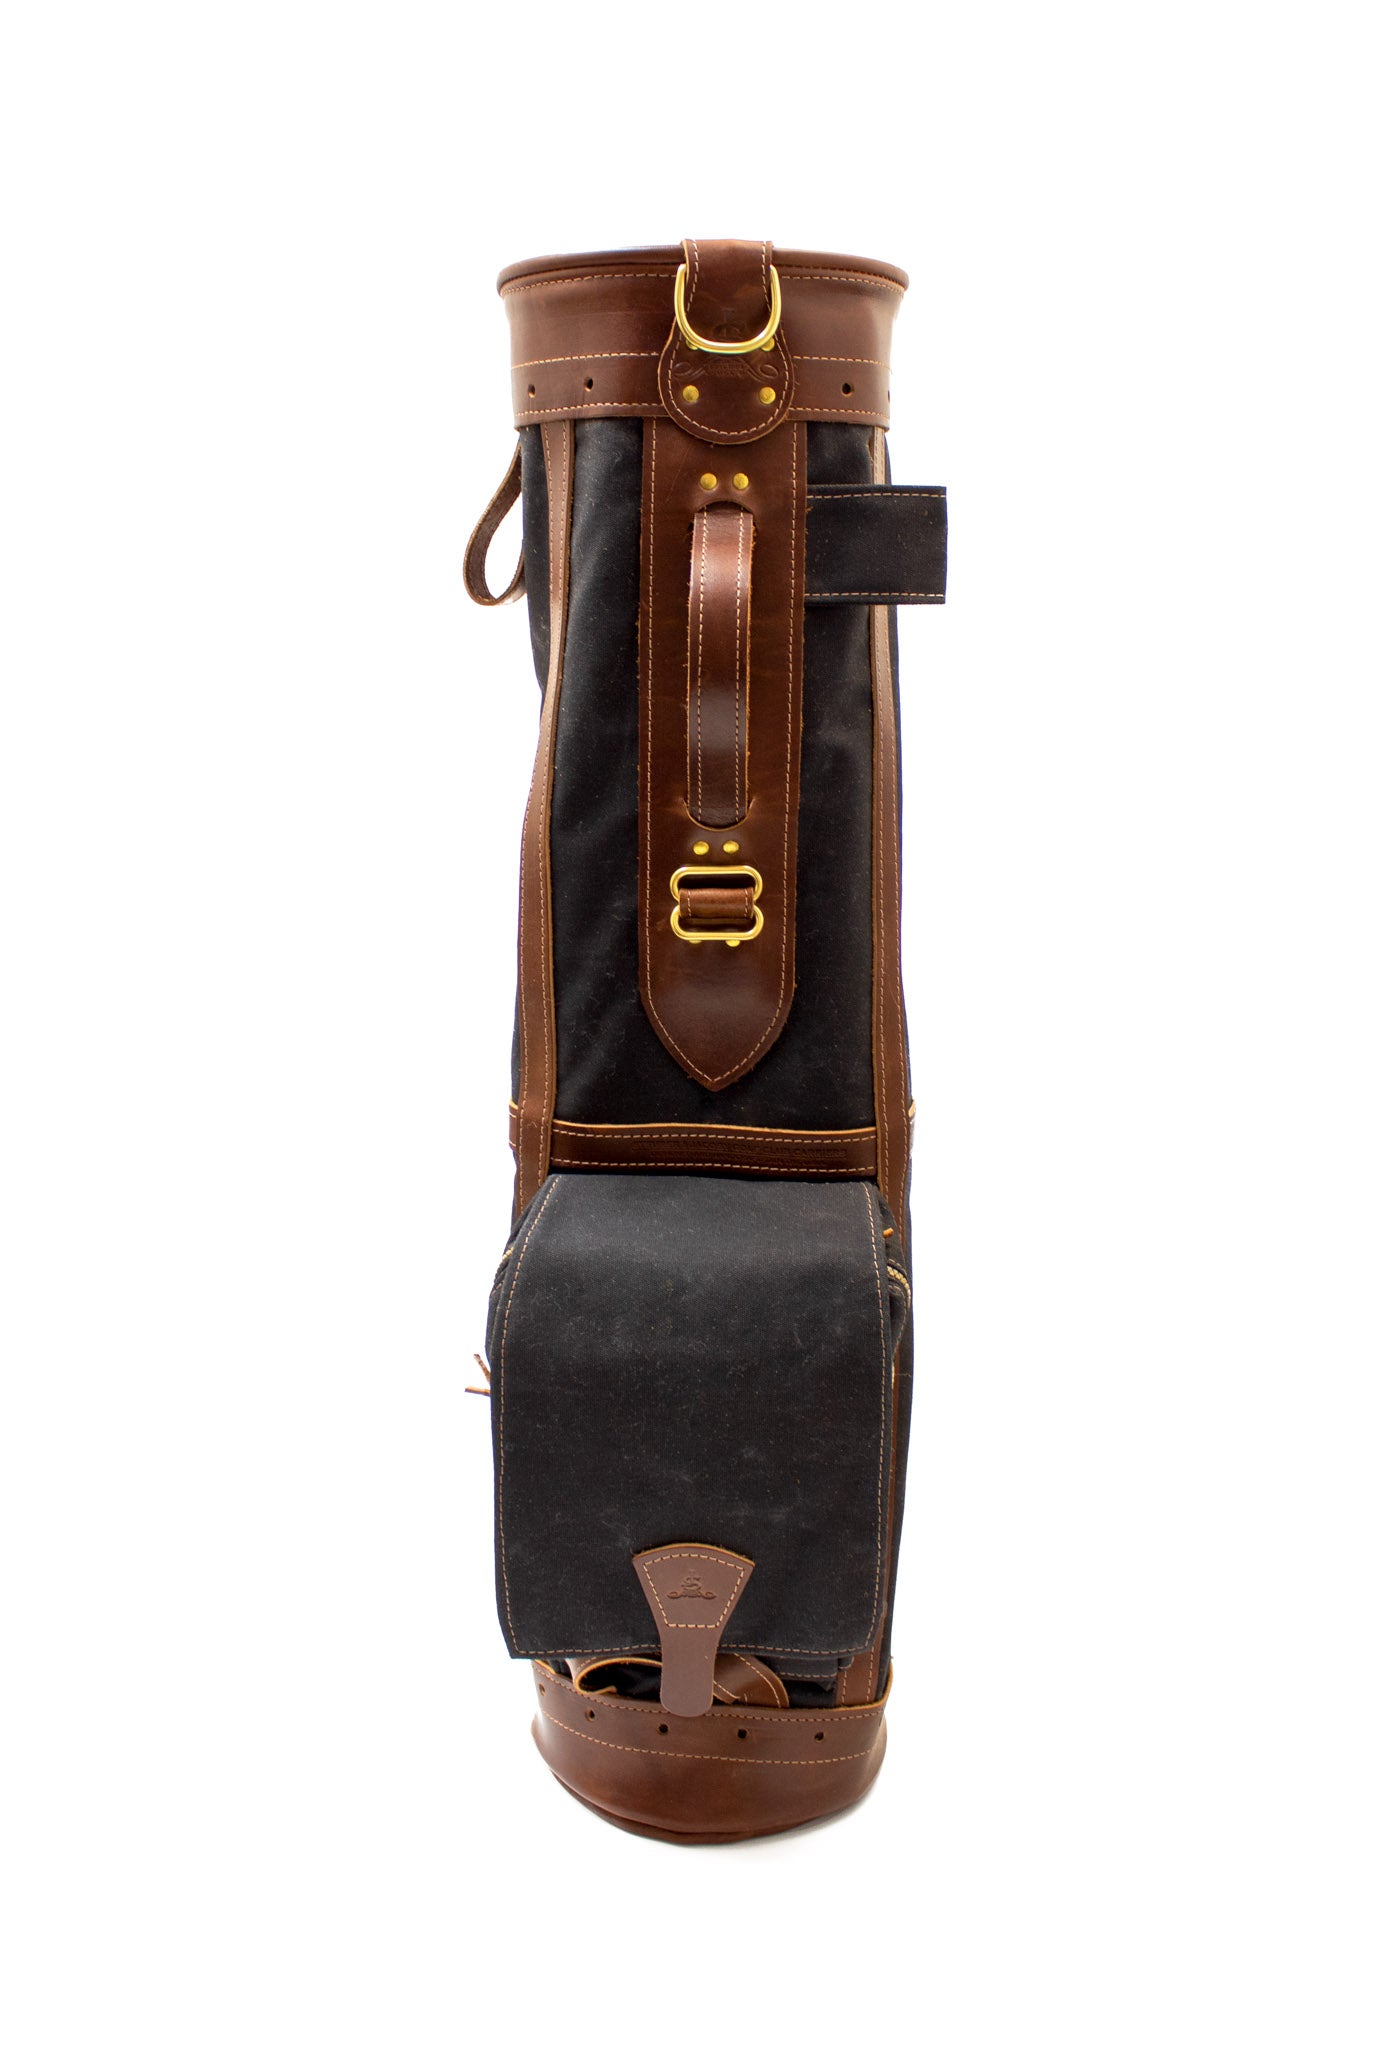 7" Sunday Style Golf Bag Black Waxed Canvas with Chestnut Leather- Steurer & Jacoby